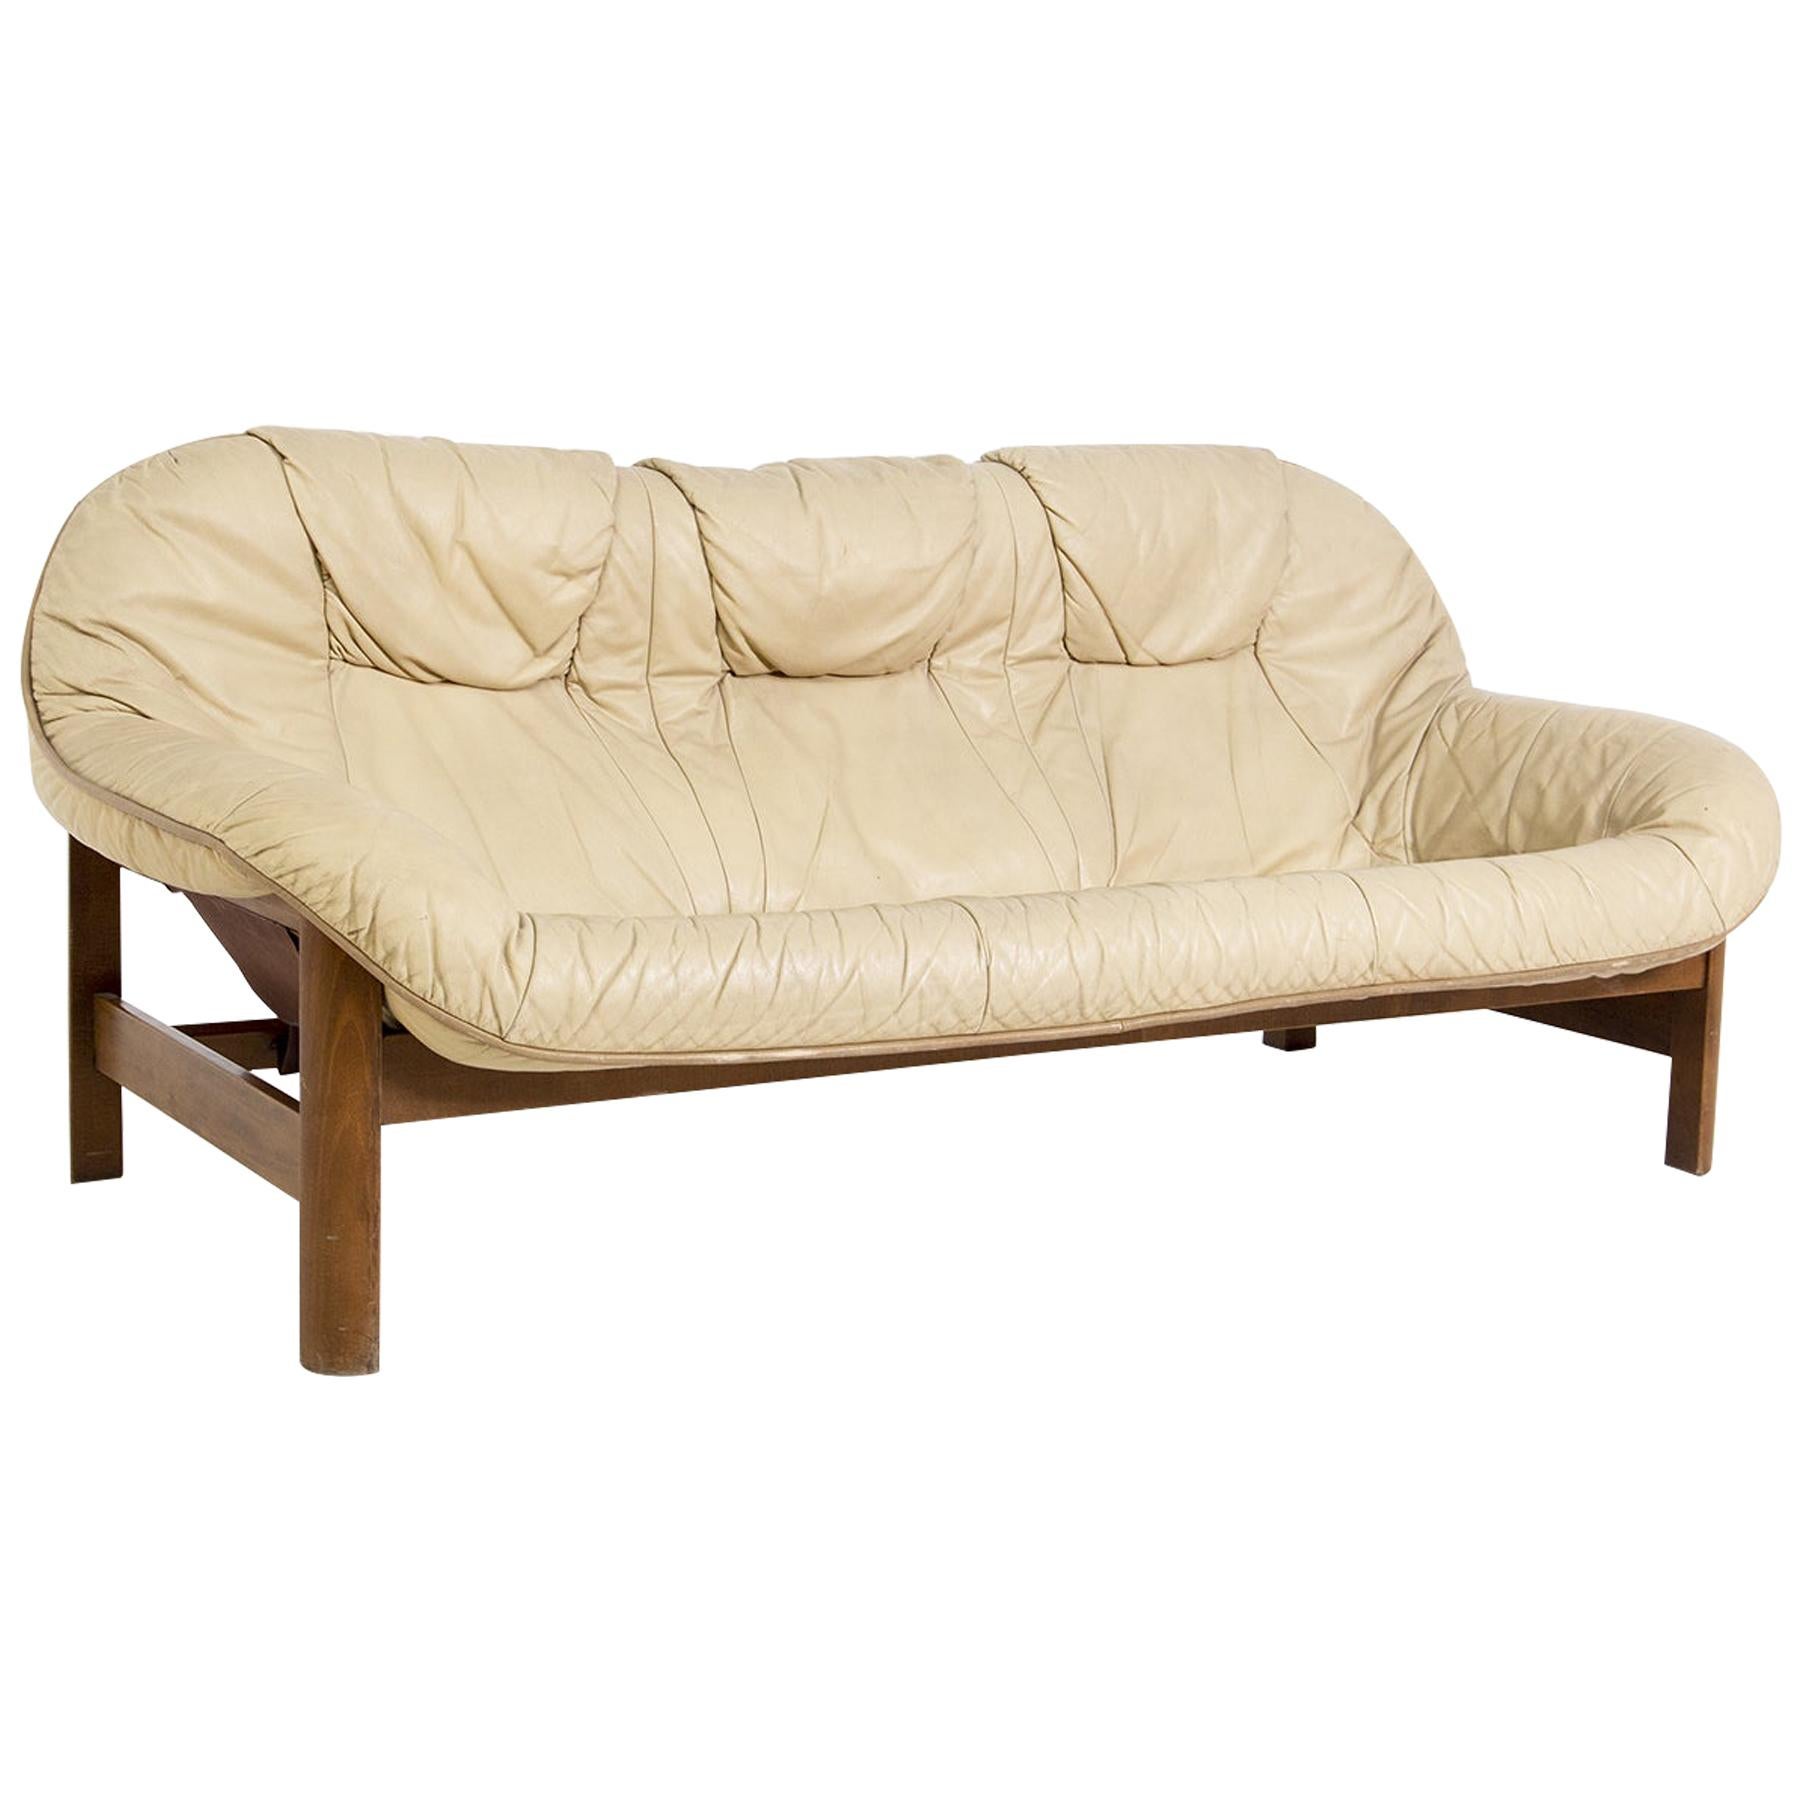 Italian Vintage Sofa in Leather Beige and Wood Two-Seat